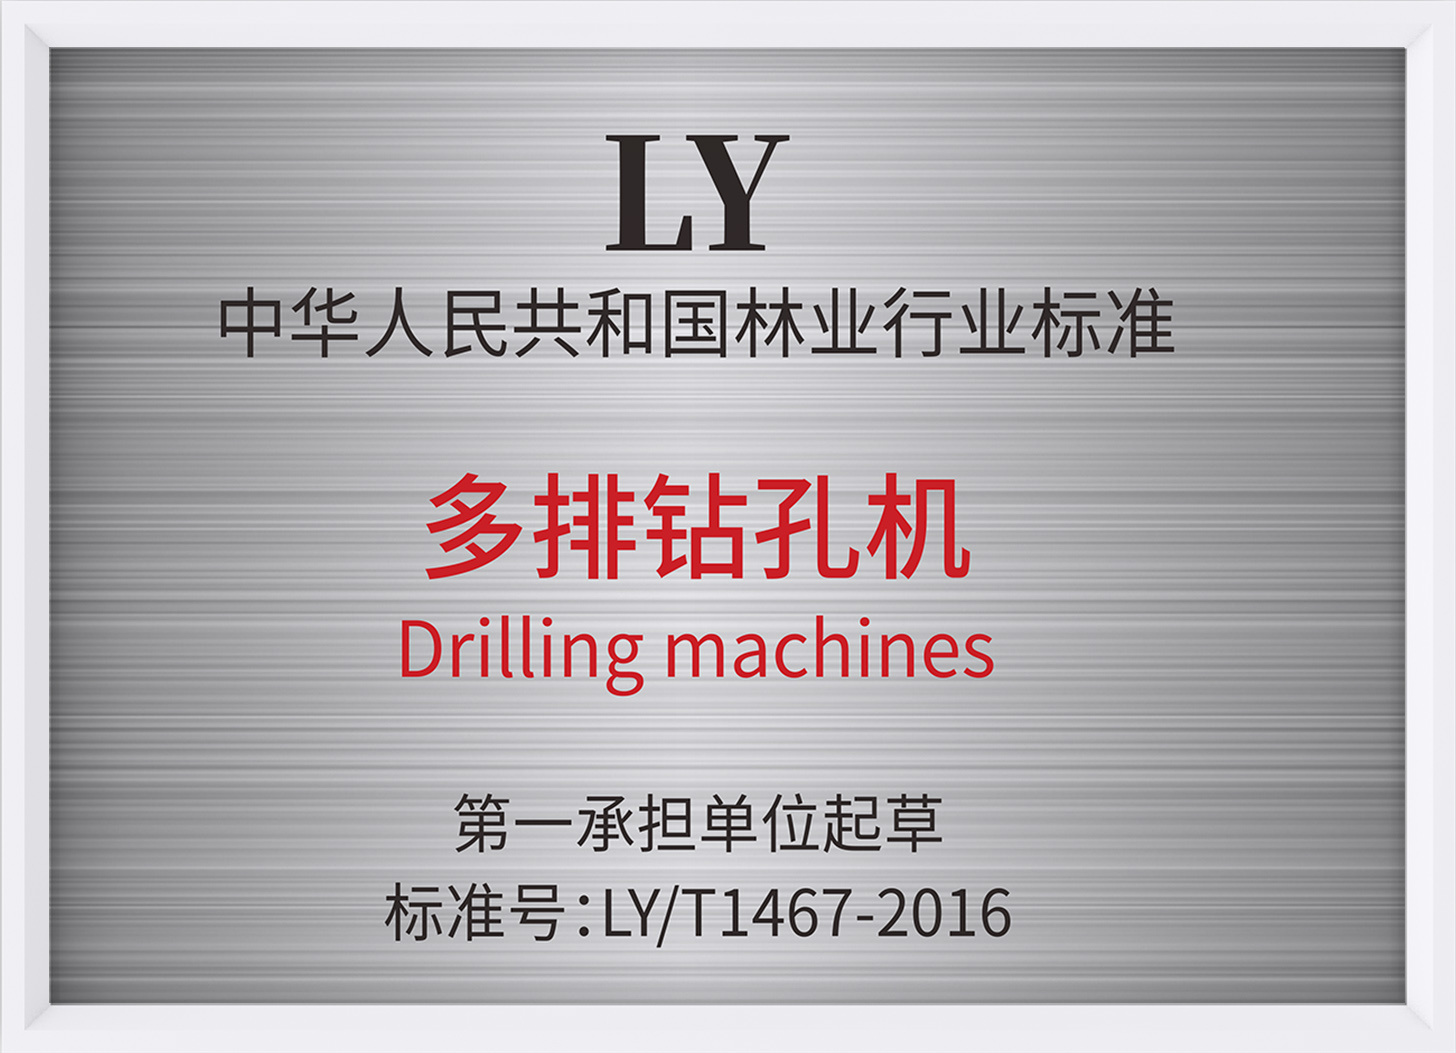 Forestry Industry Standard: Multi-Row Drilling Machines